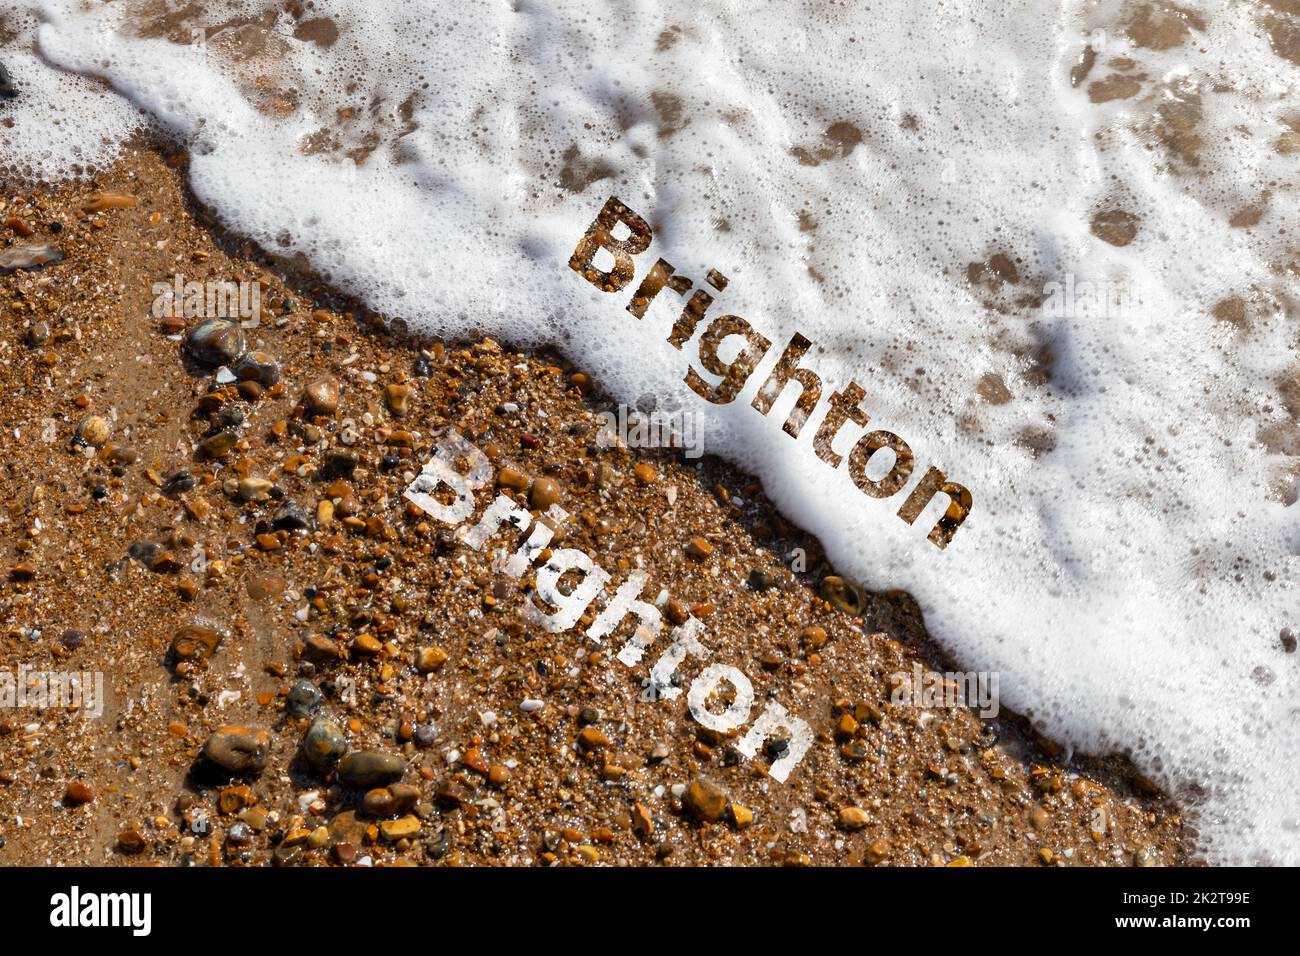 Brighton text cut out on both pebble beach and lapping waves Stock Photo